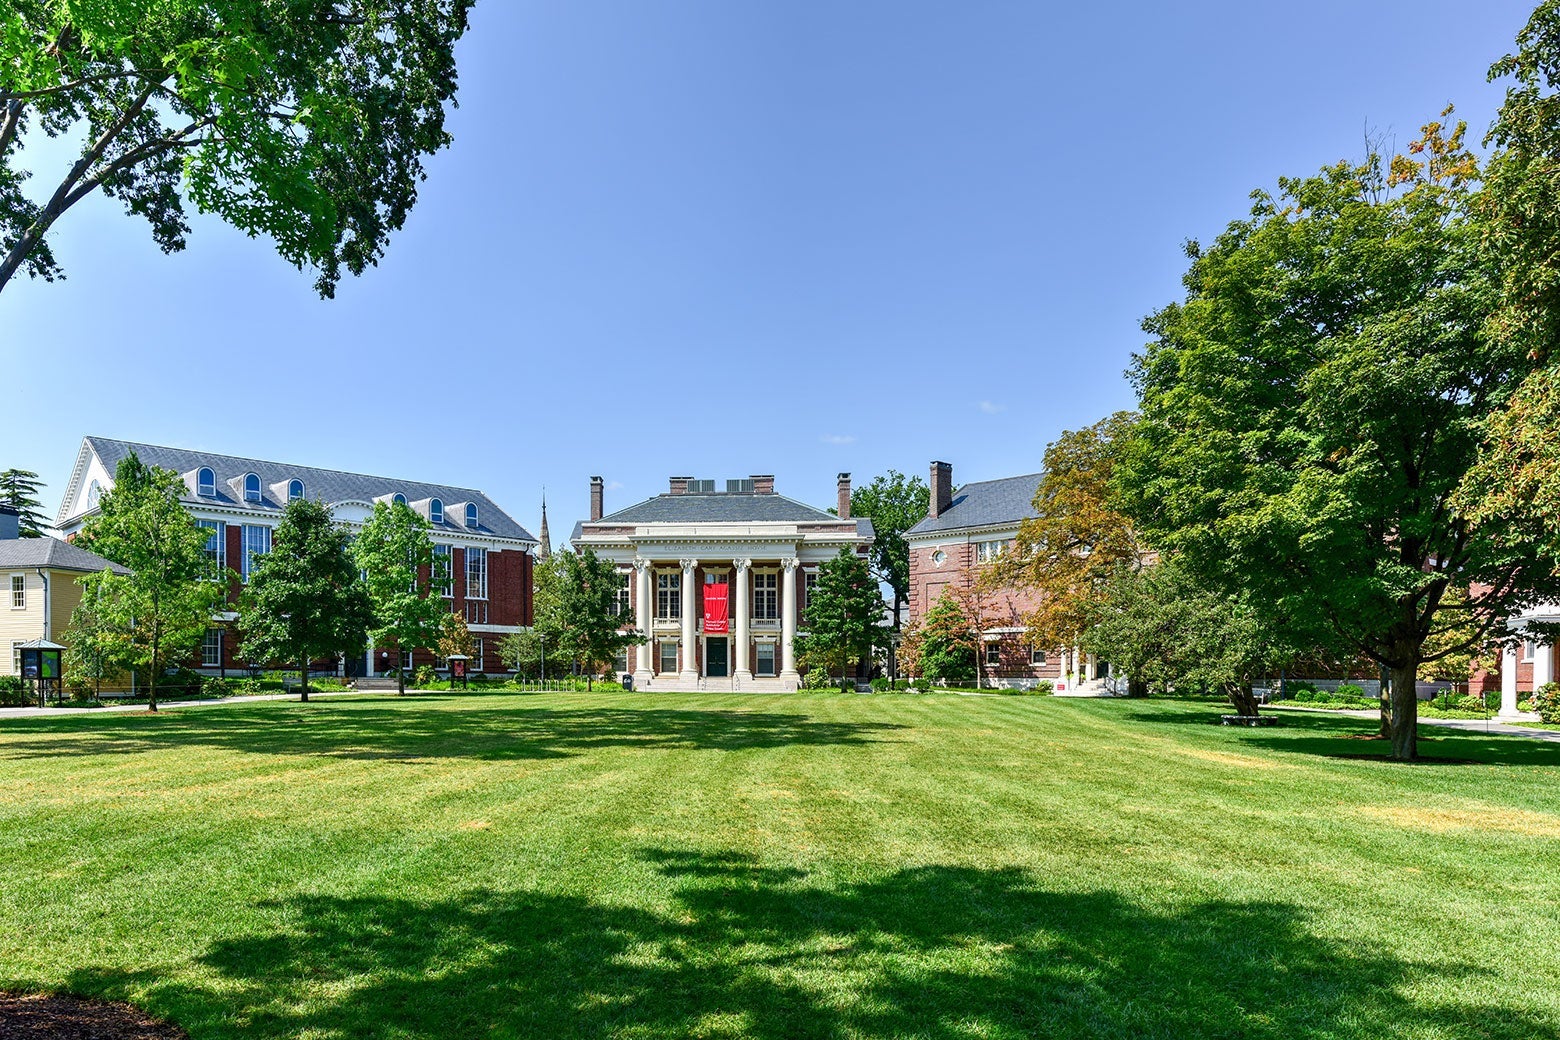 Colonial-style buildings opening onto an immaculate lawn.